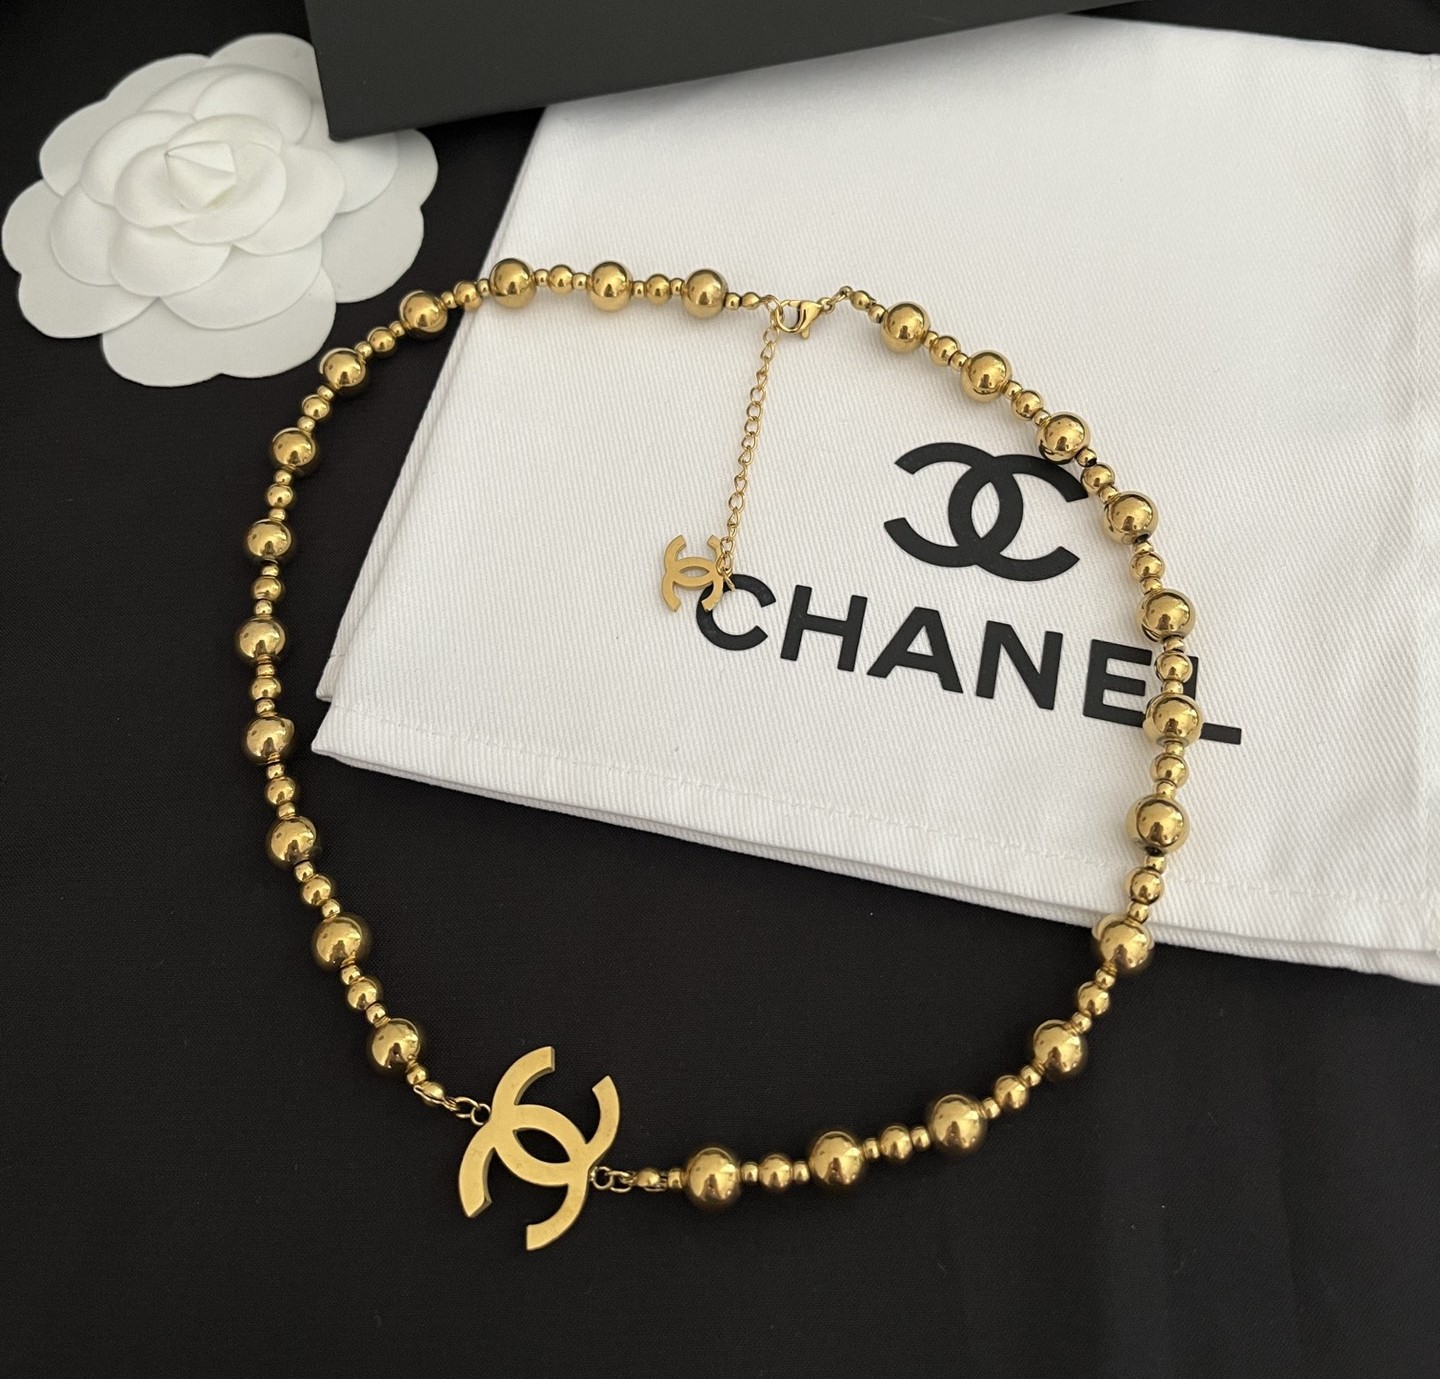 X566 Chanel necklace